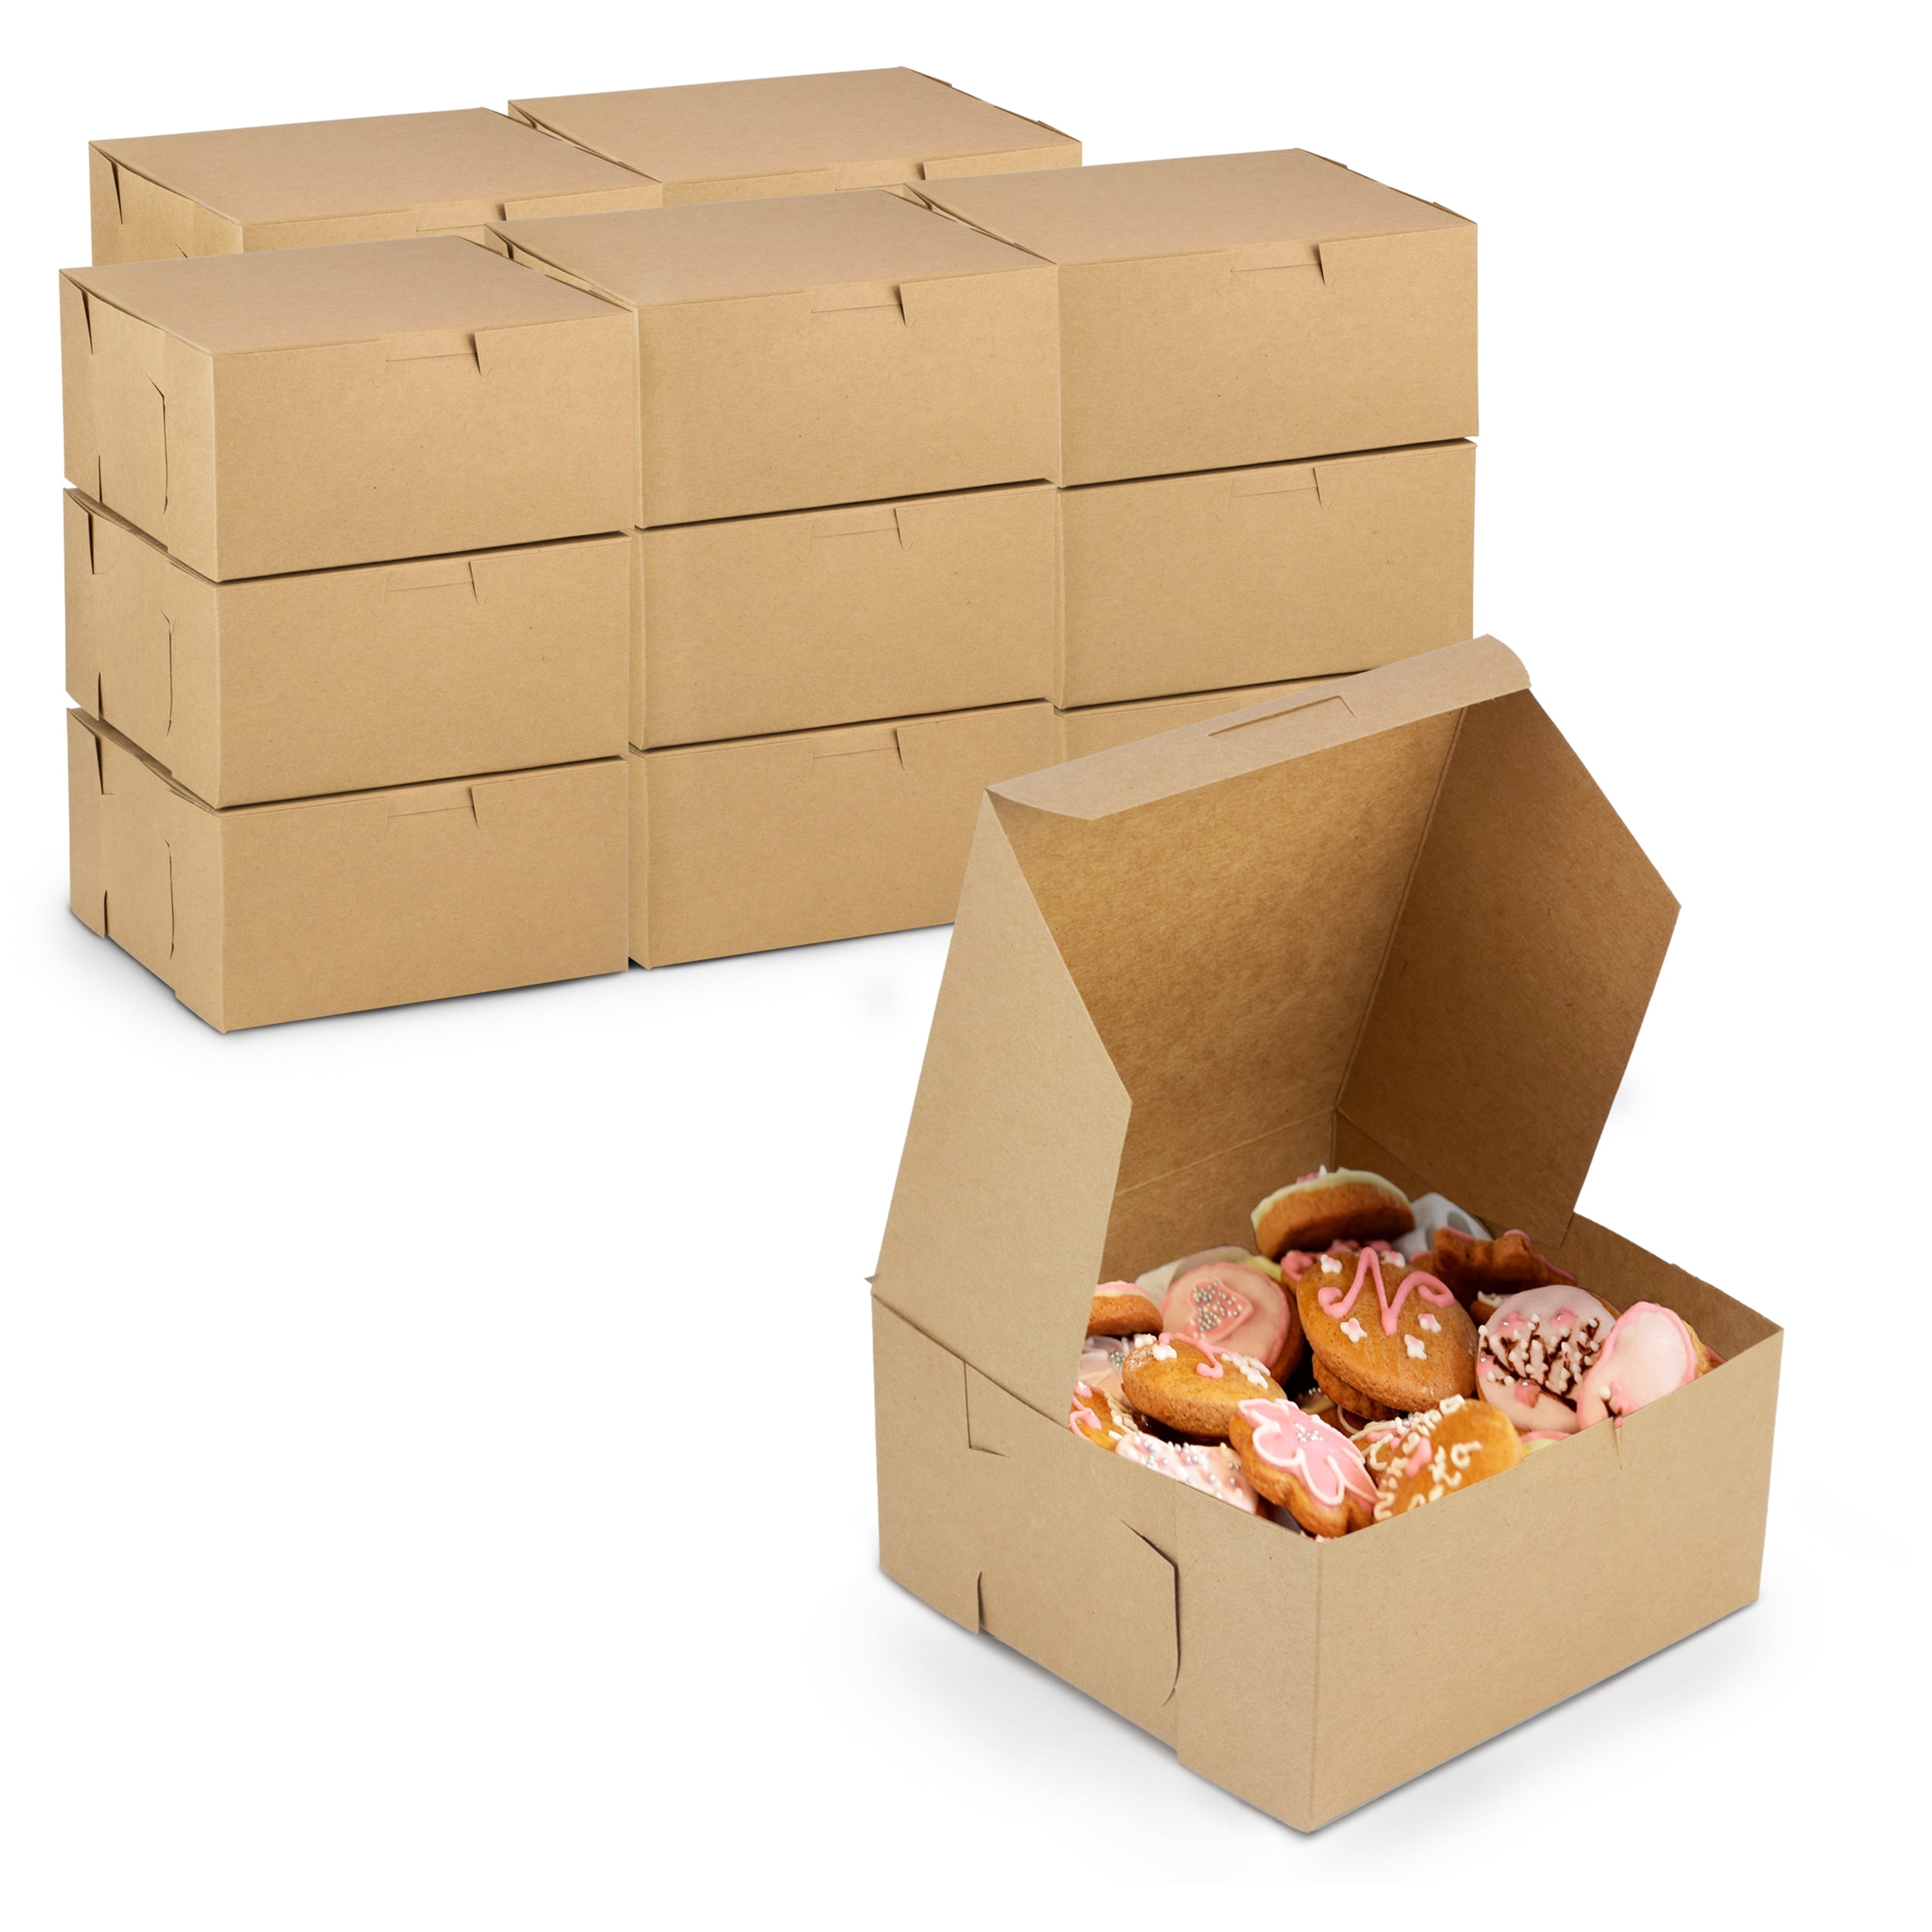 ONE MORE 6x6x3Brown Bakery Boxes with PVC Window for Pie and Cookies Boxes Small Natural Craft Paper Box 6x6x3inch,Pack of 15 Brown,15 